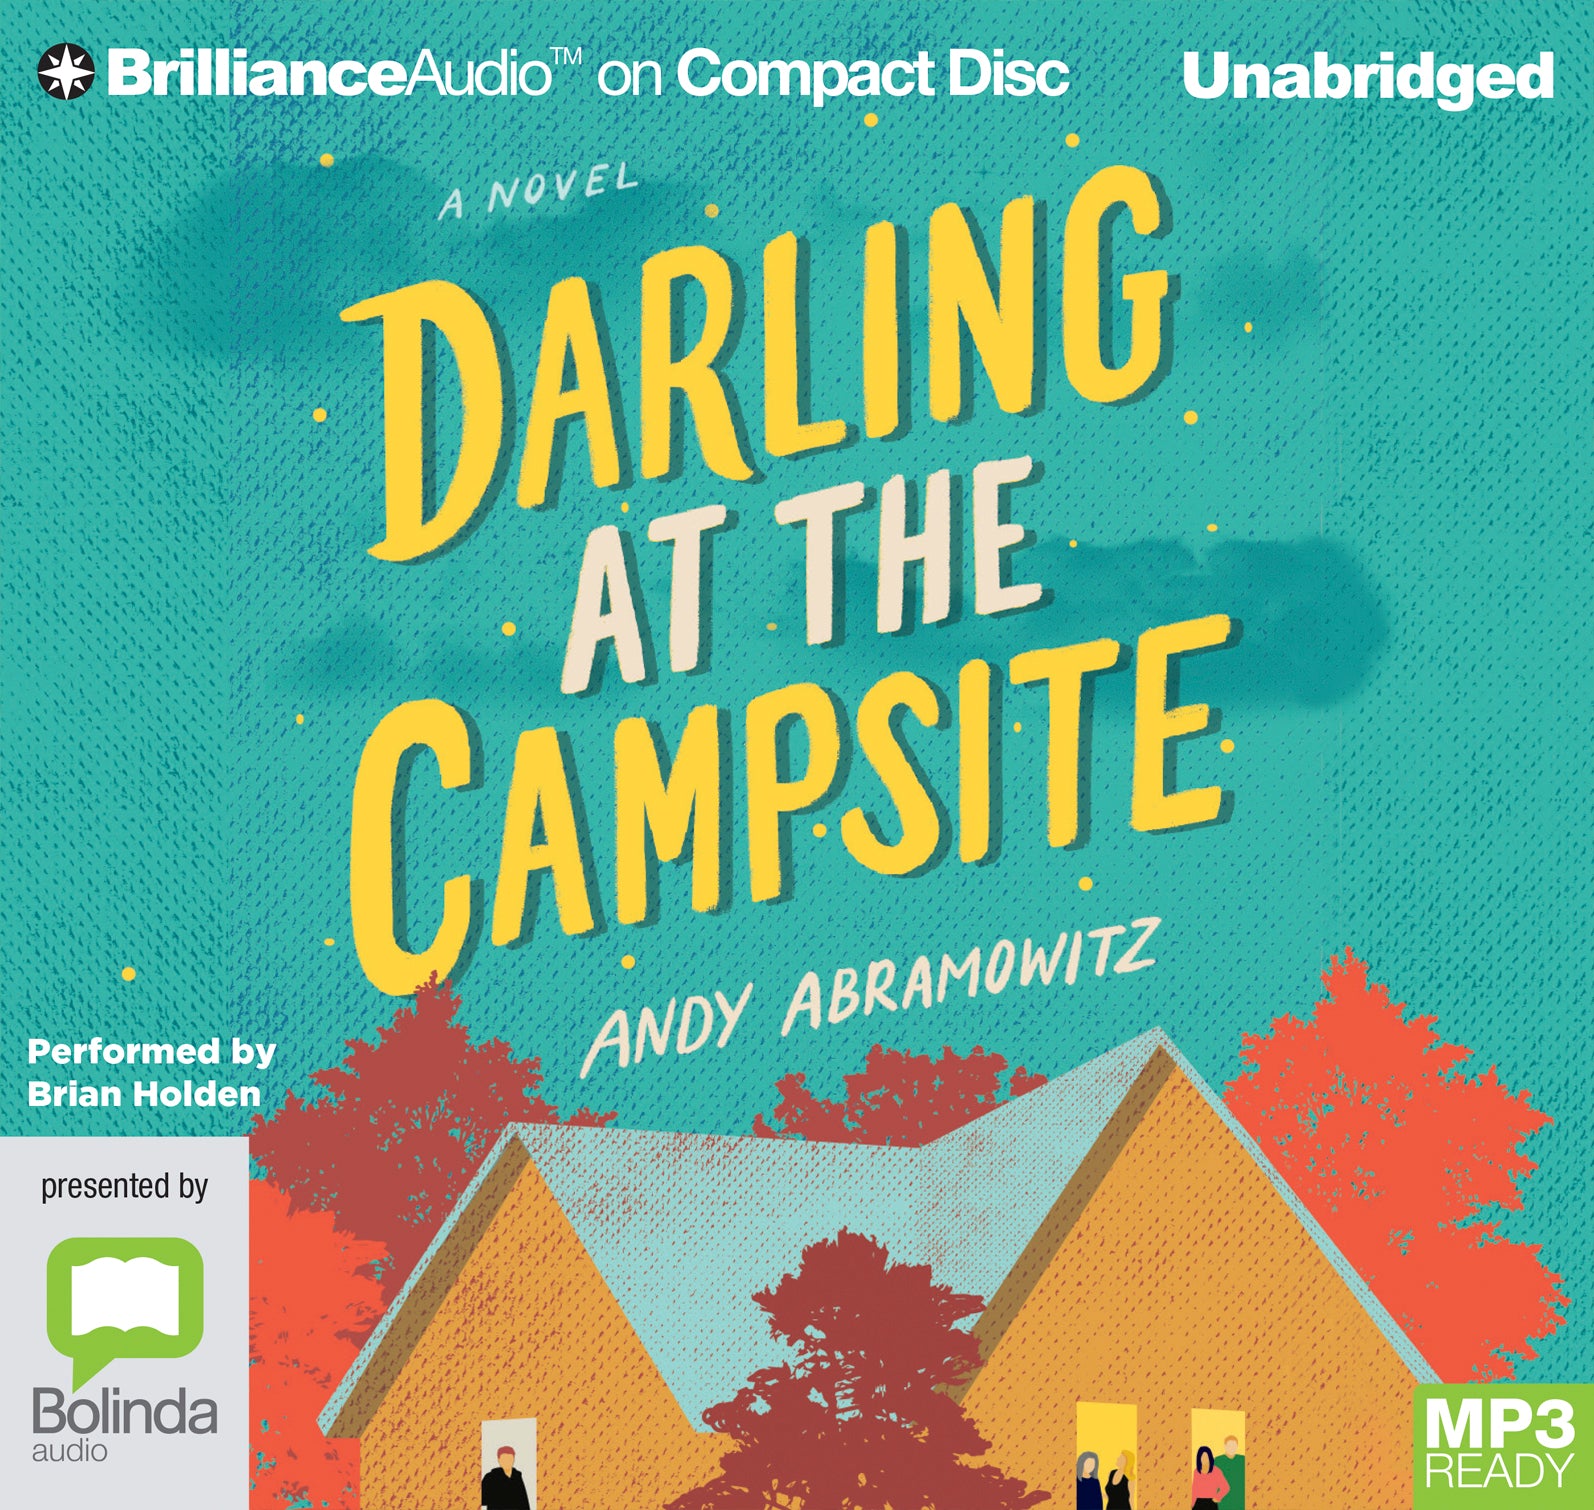 Darling At The Campsite  - Unbridged Audio Book on MP3